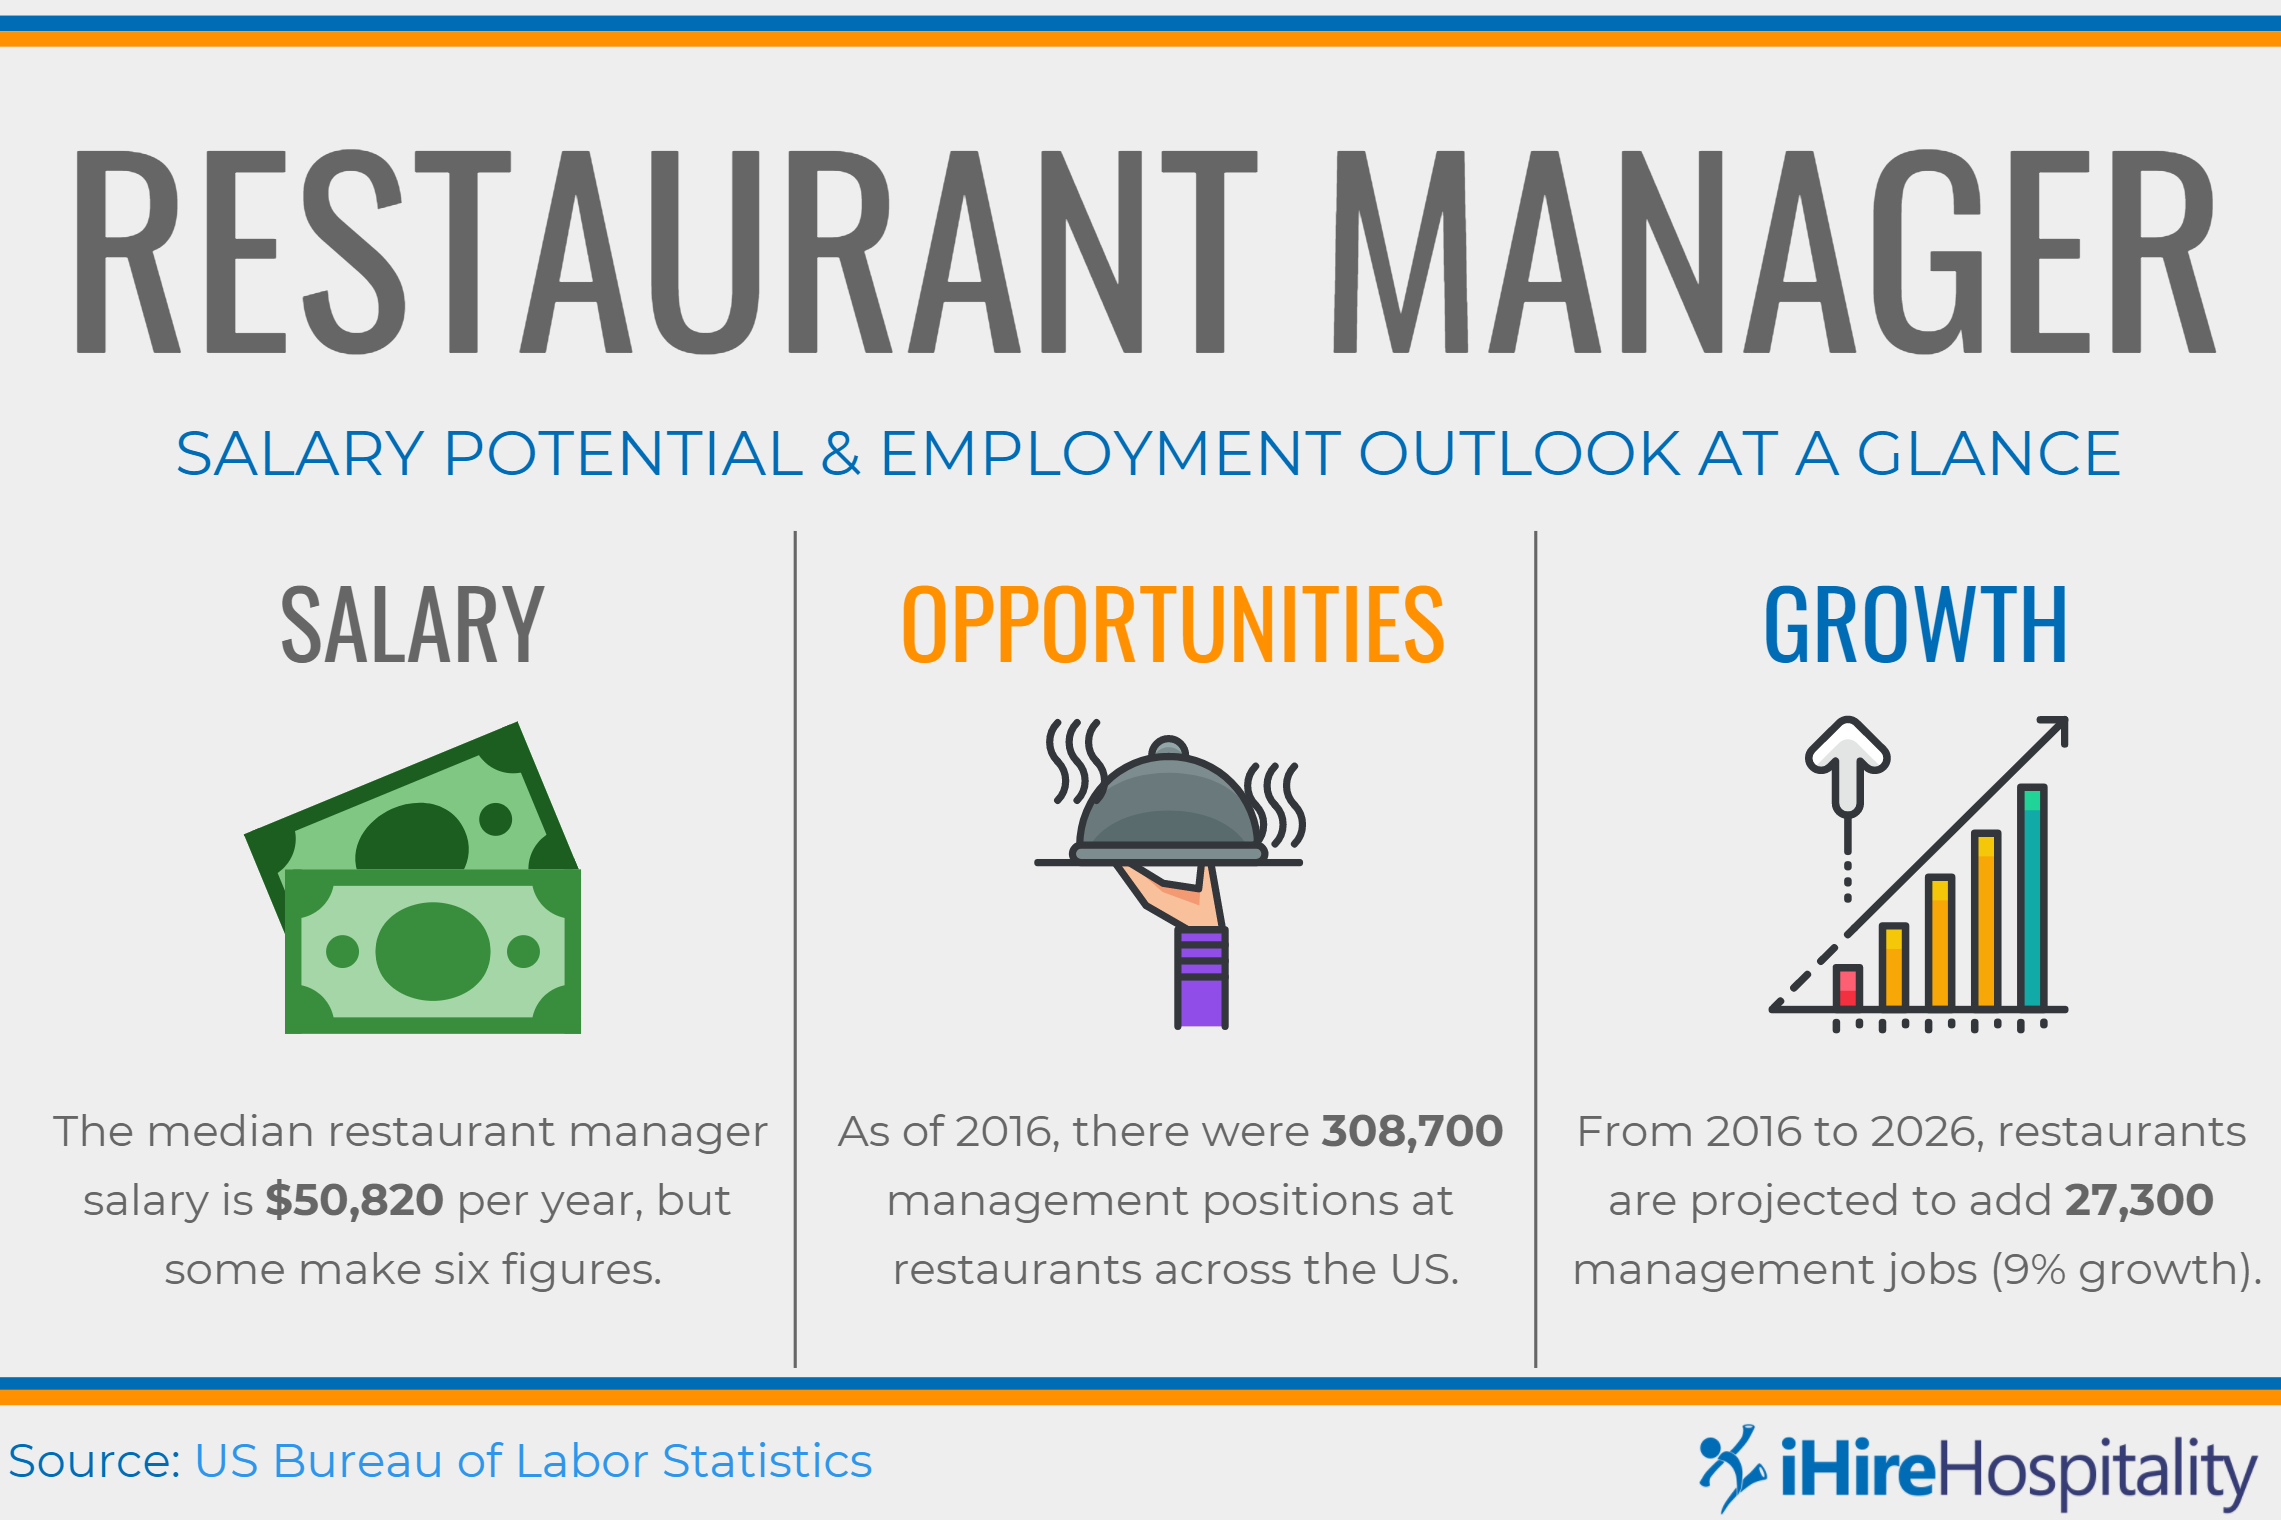 Restaurant manager salary information and employment outlook graphic